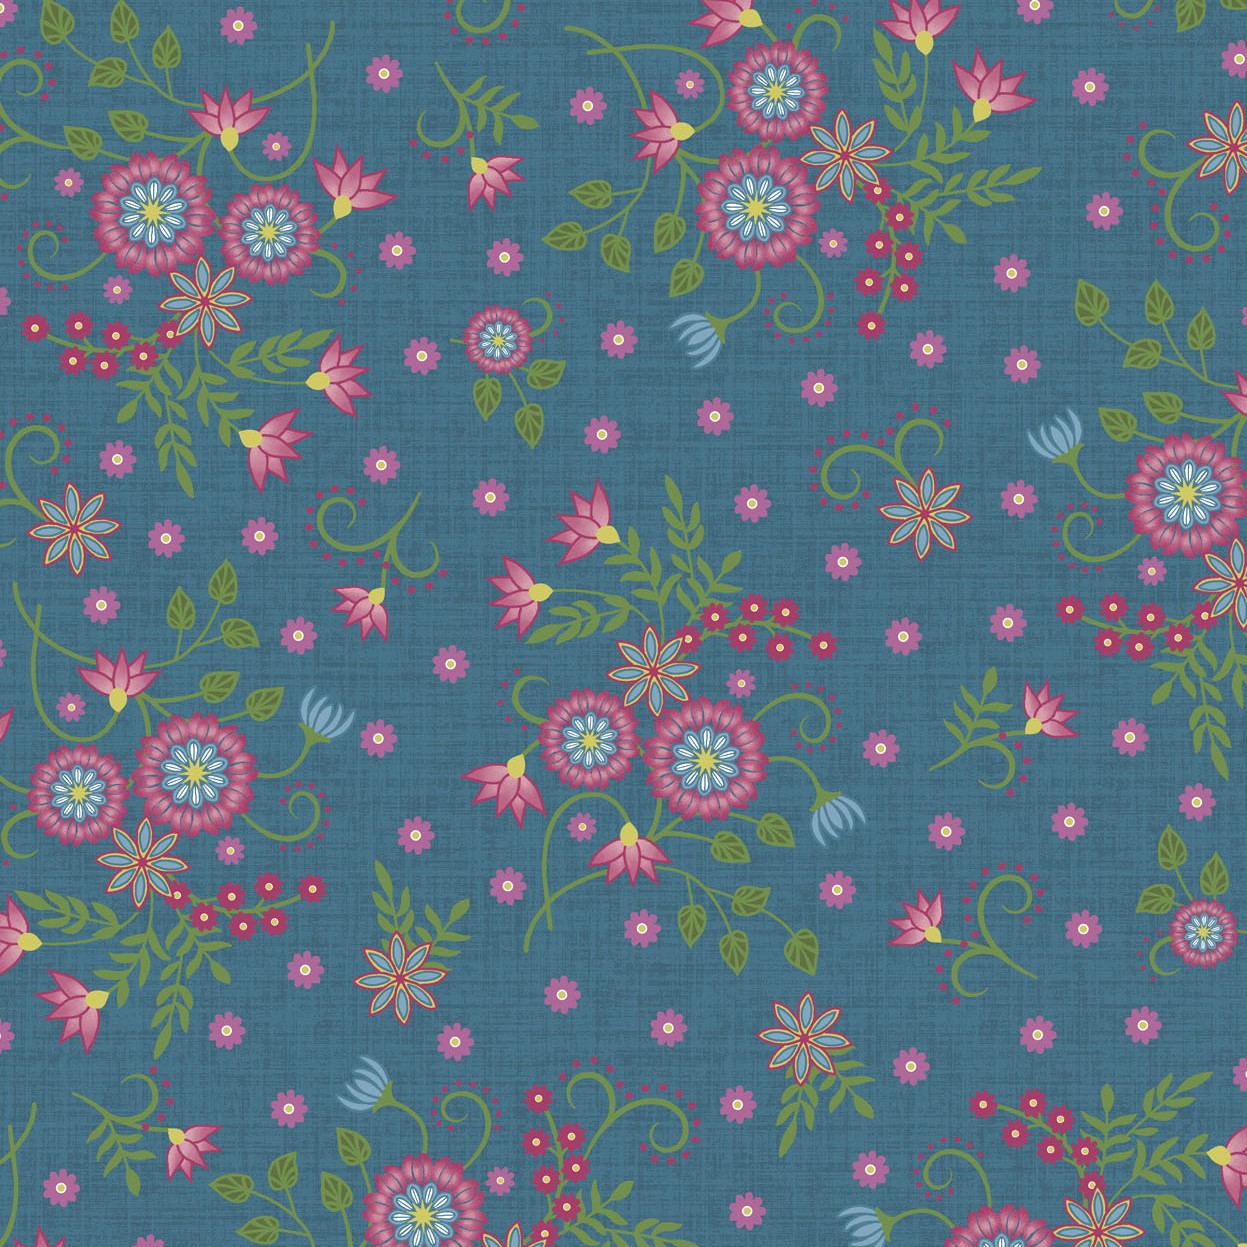 Quilting Fabric - Blue Floral from Flower and Vine by Monique Jacobs for Maywood Studio 9881 B